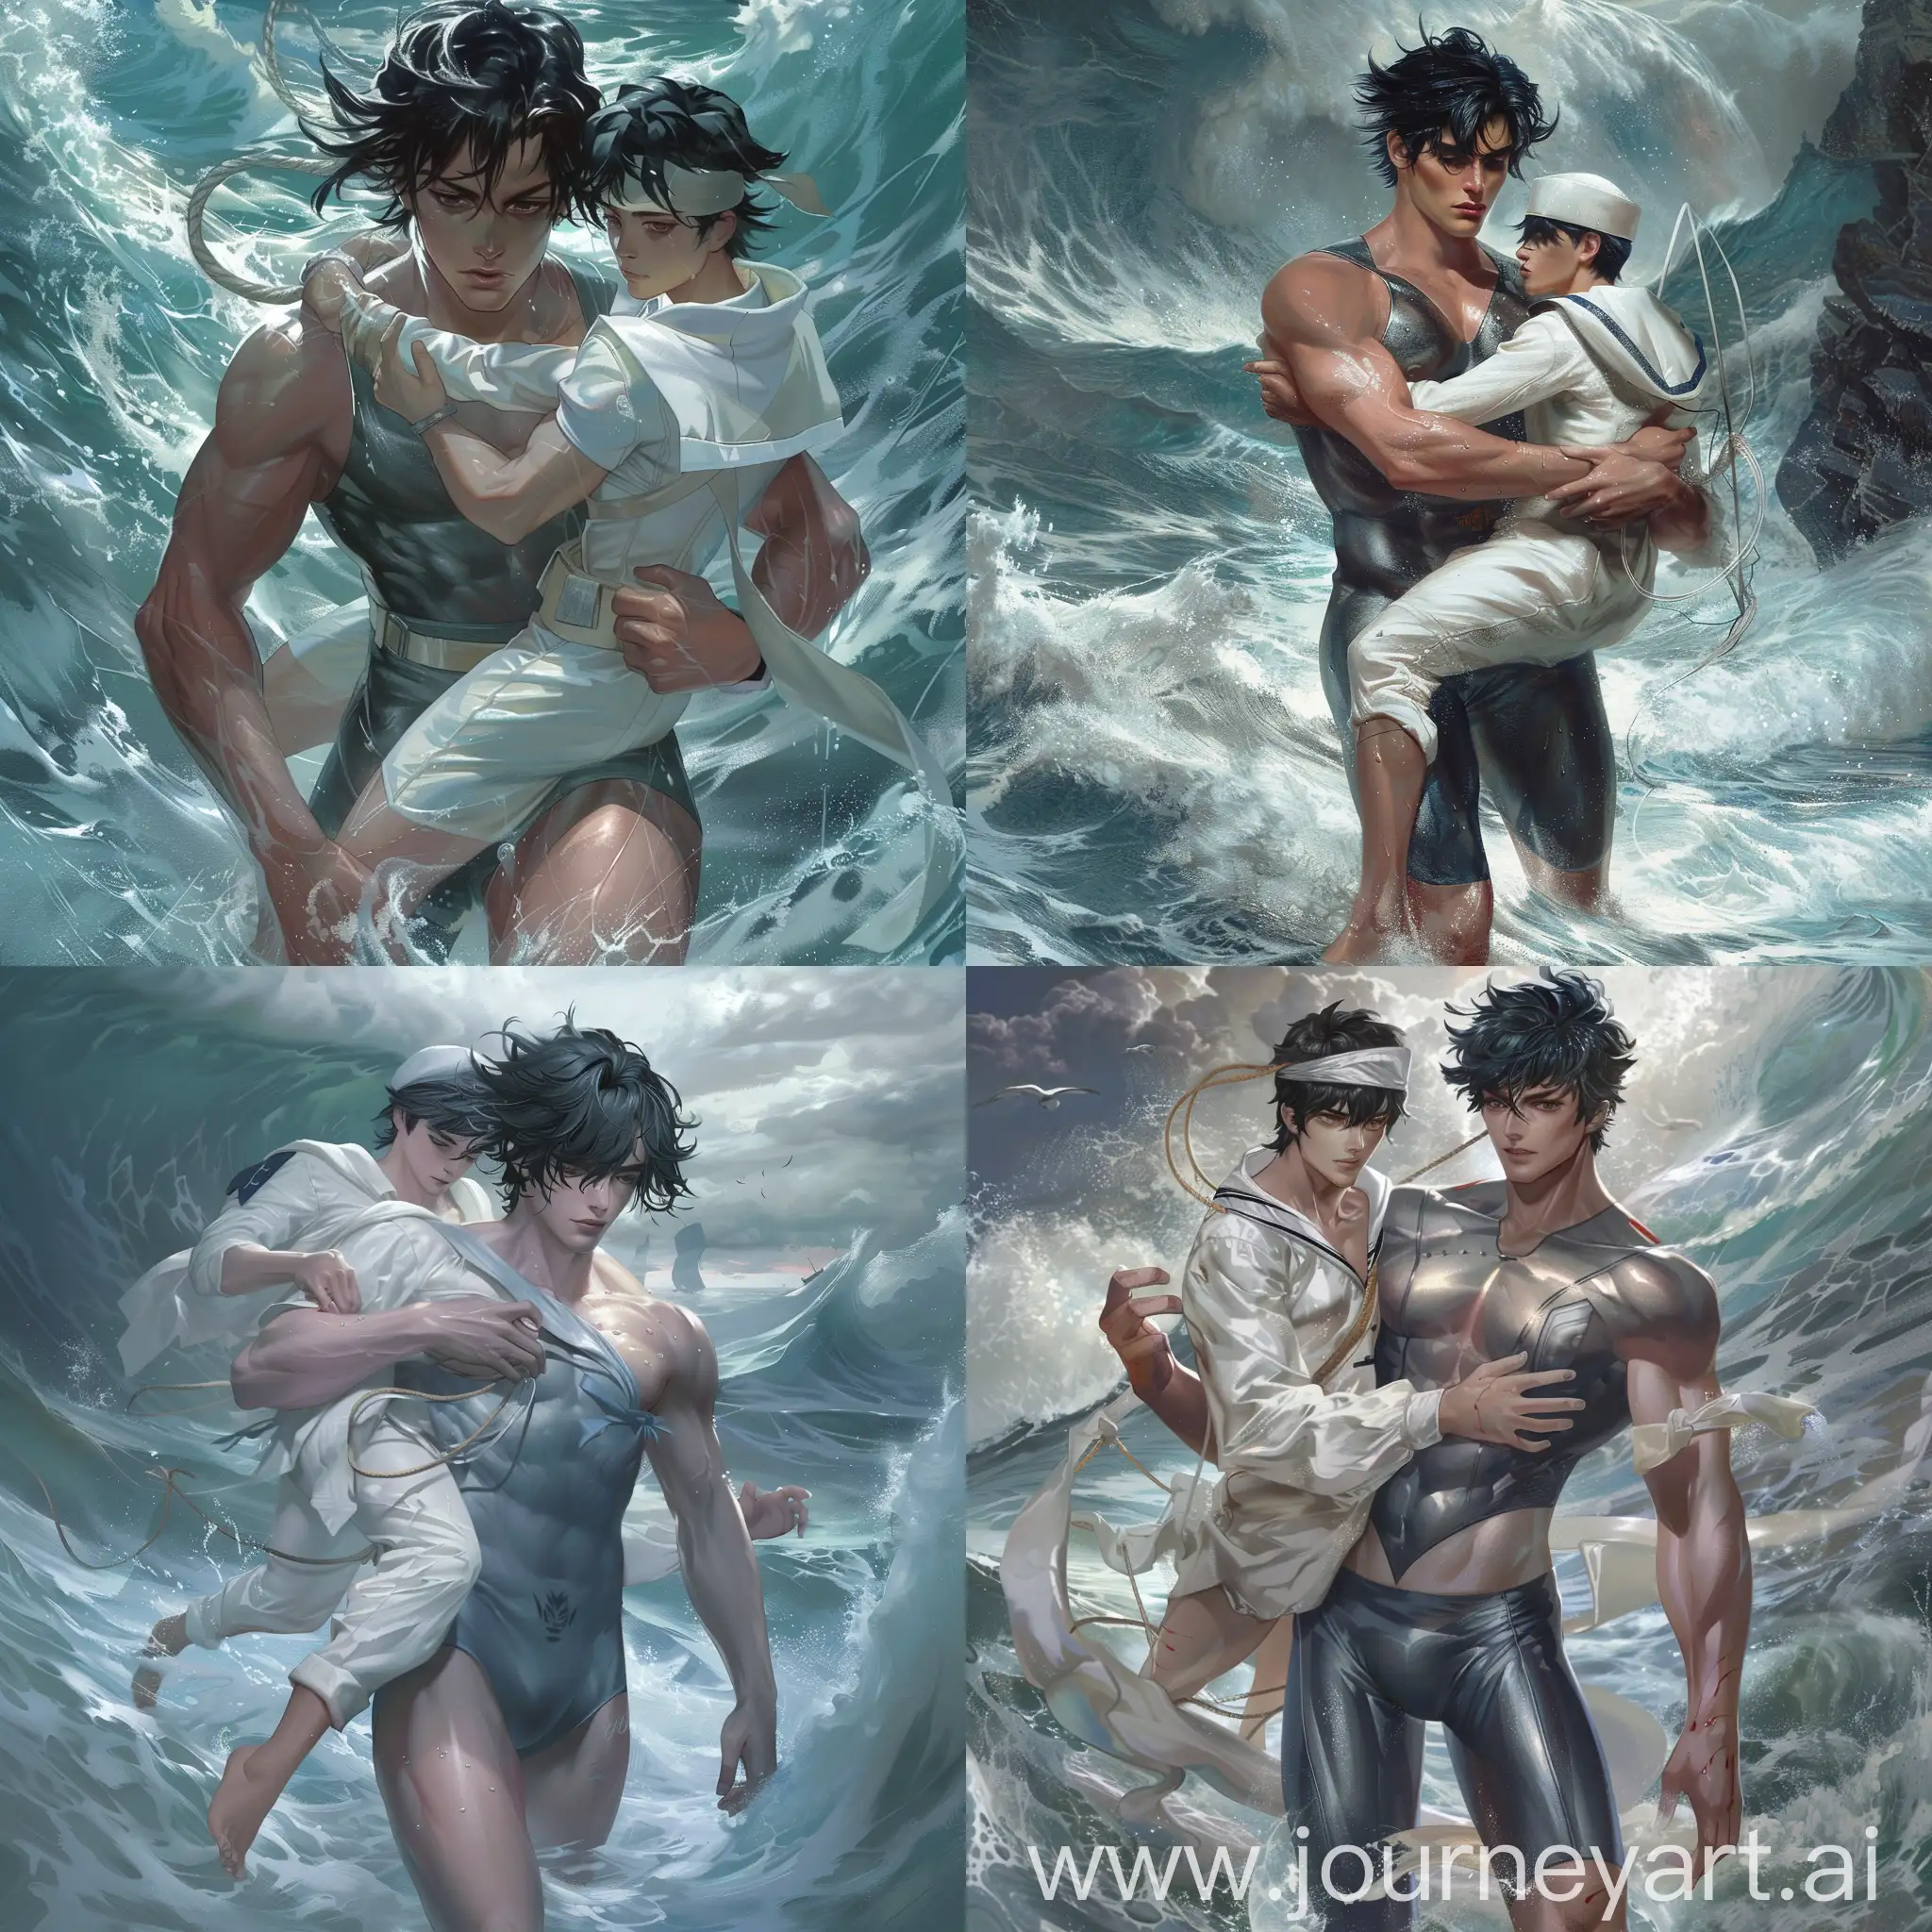 Dynamic-Embrace-Strong-Young-Male-Holding-Sailor-in-Wild-Sea